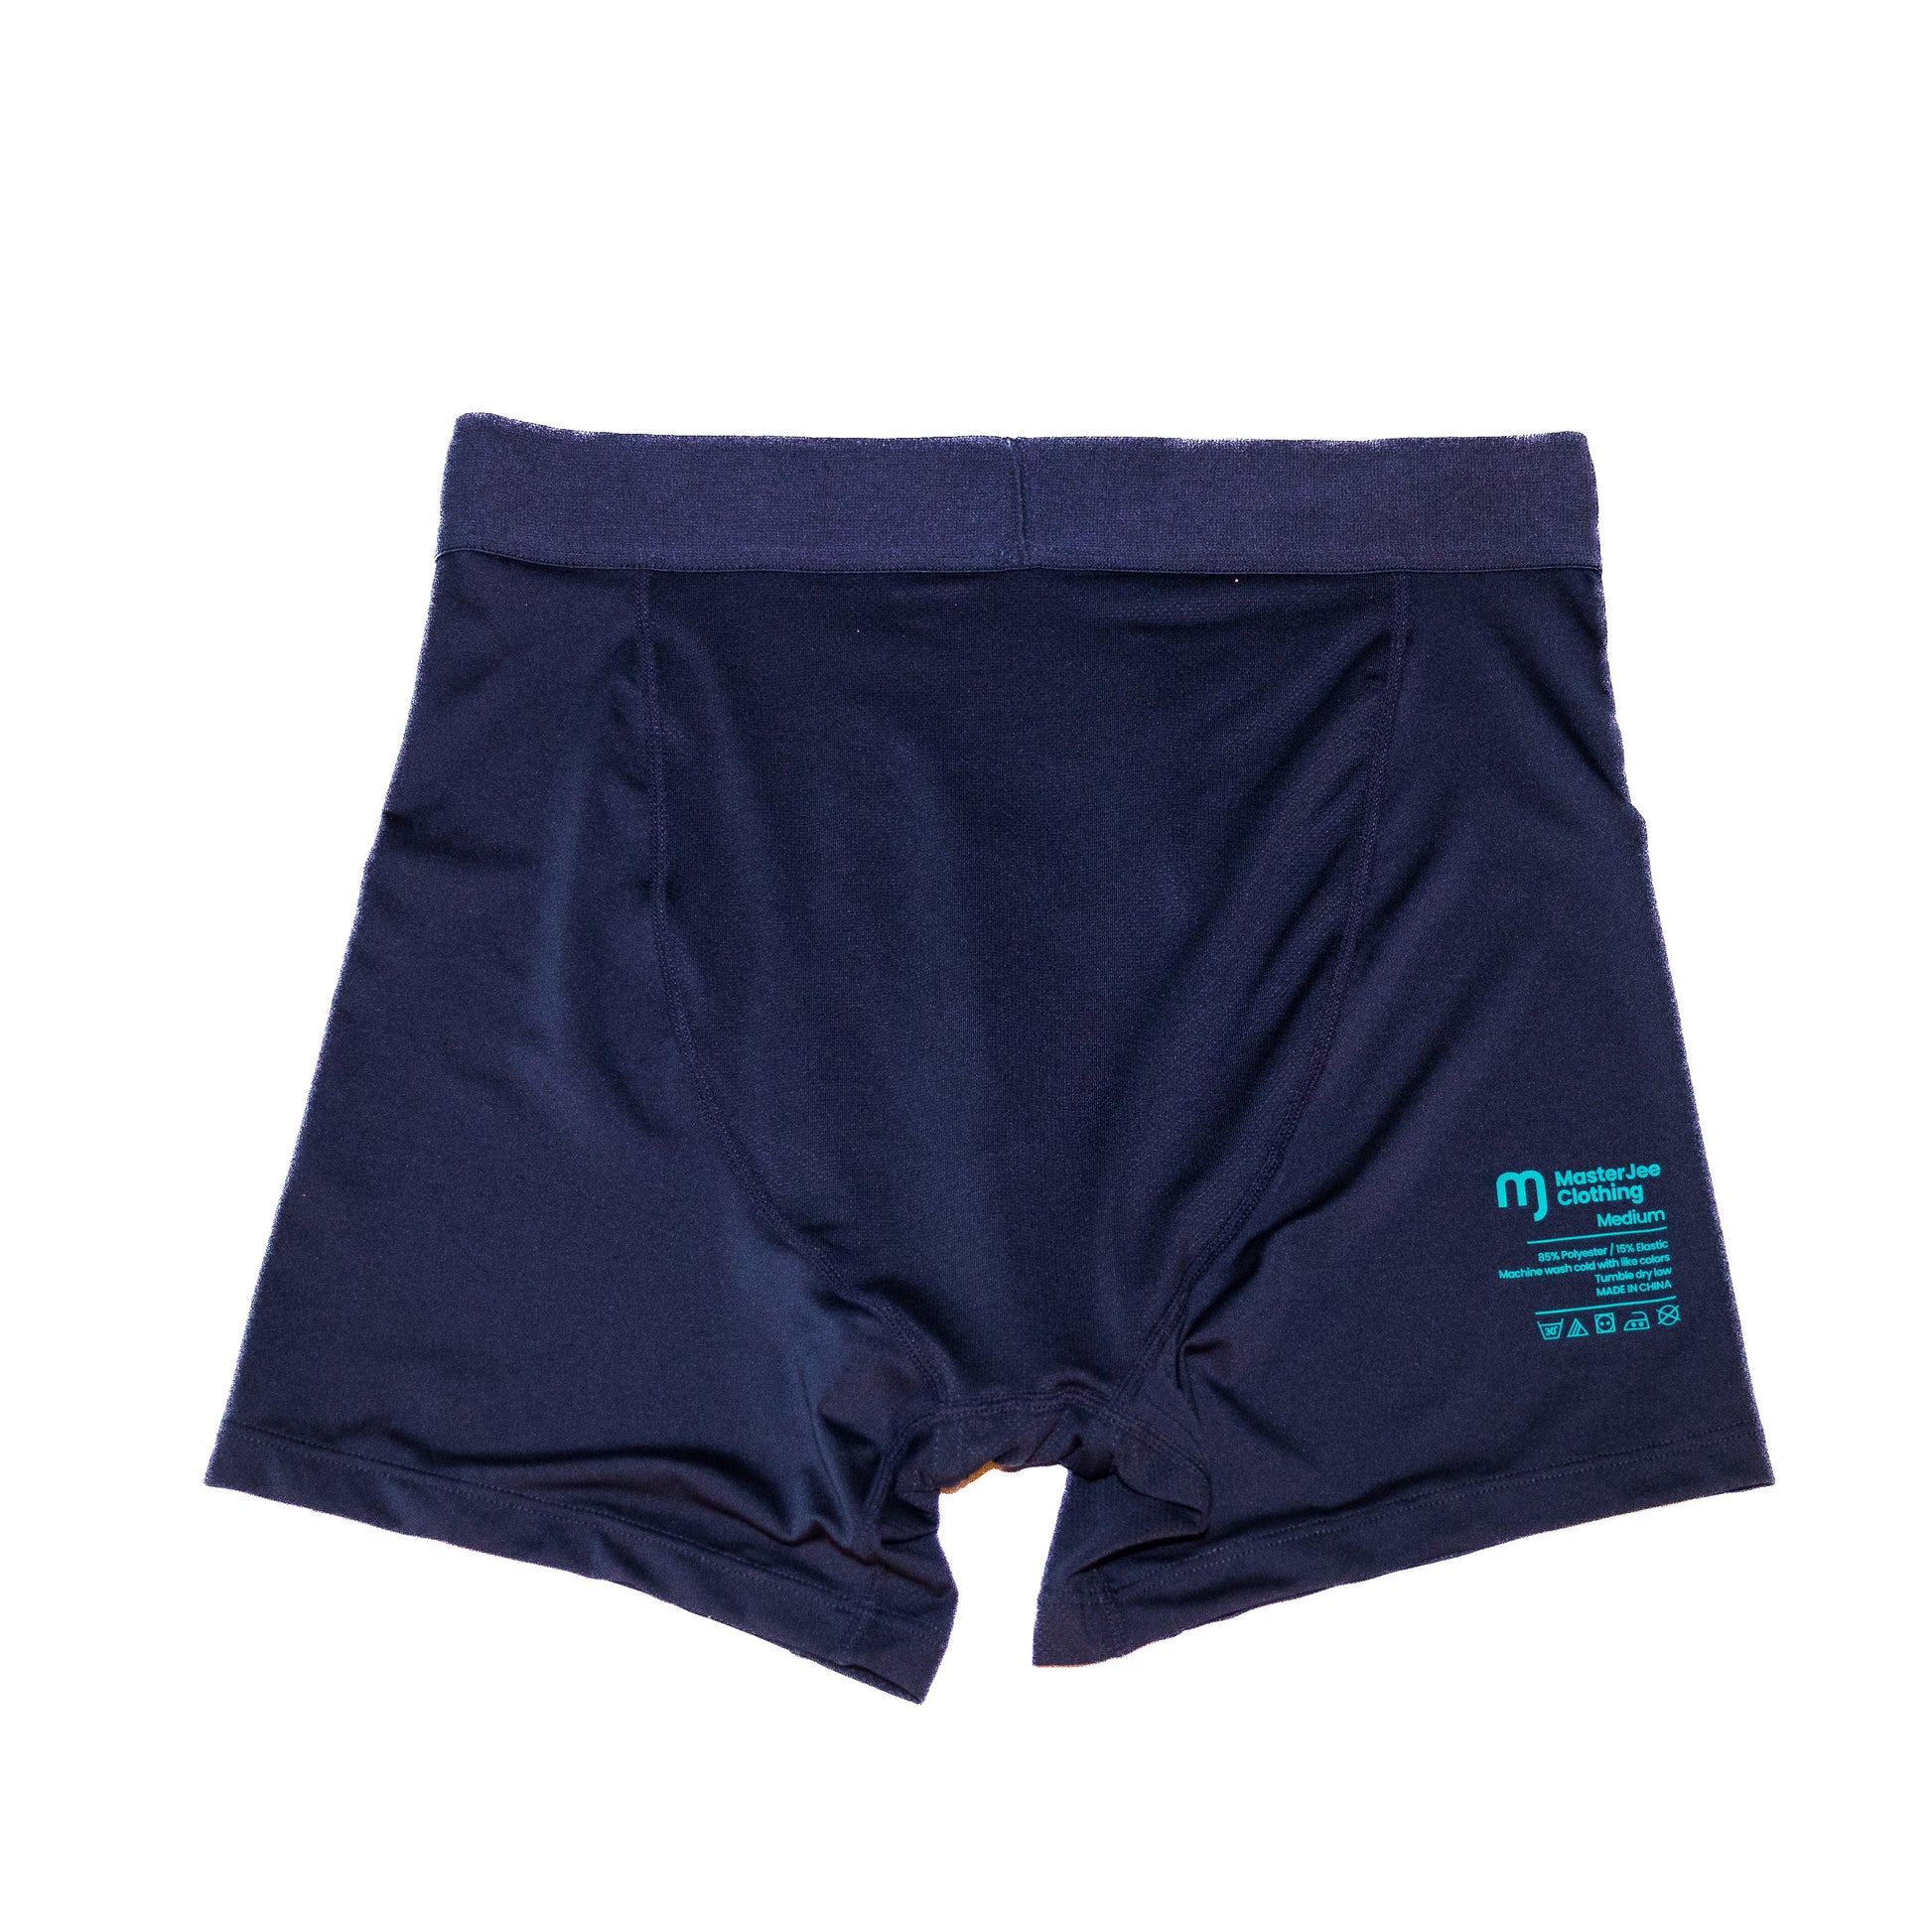 Sport X Boxer Briefs- Made for a Hustler – MasterJee Clothing